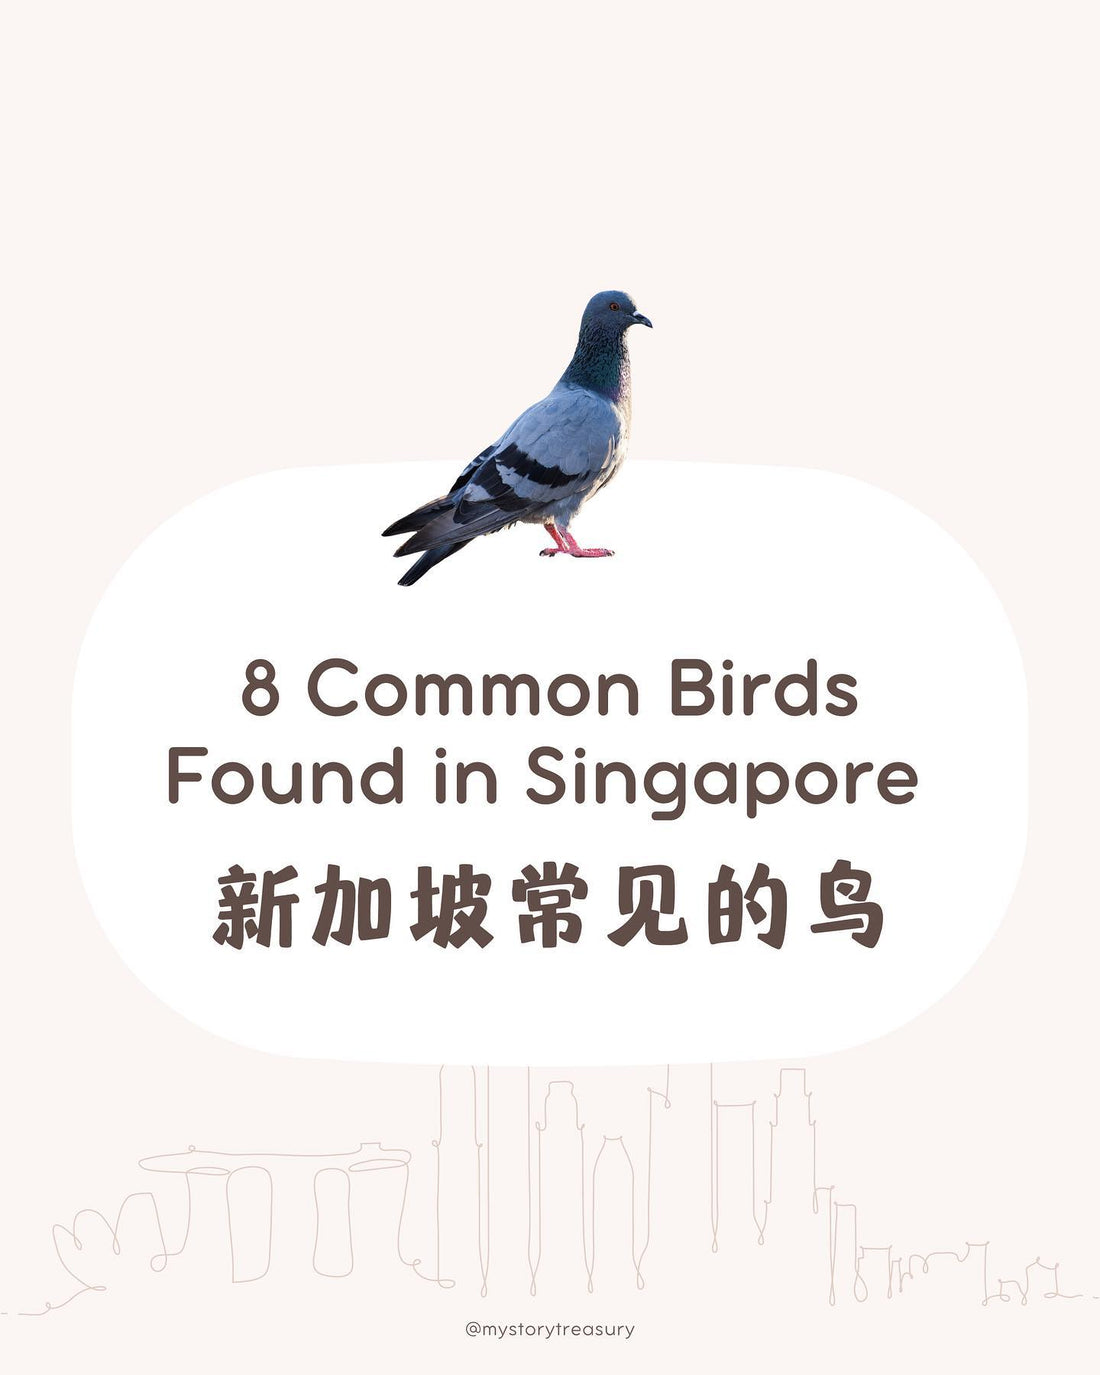 Do you know what are our common local birds called?